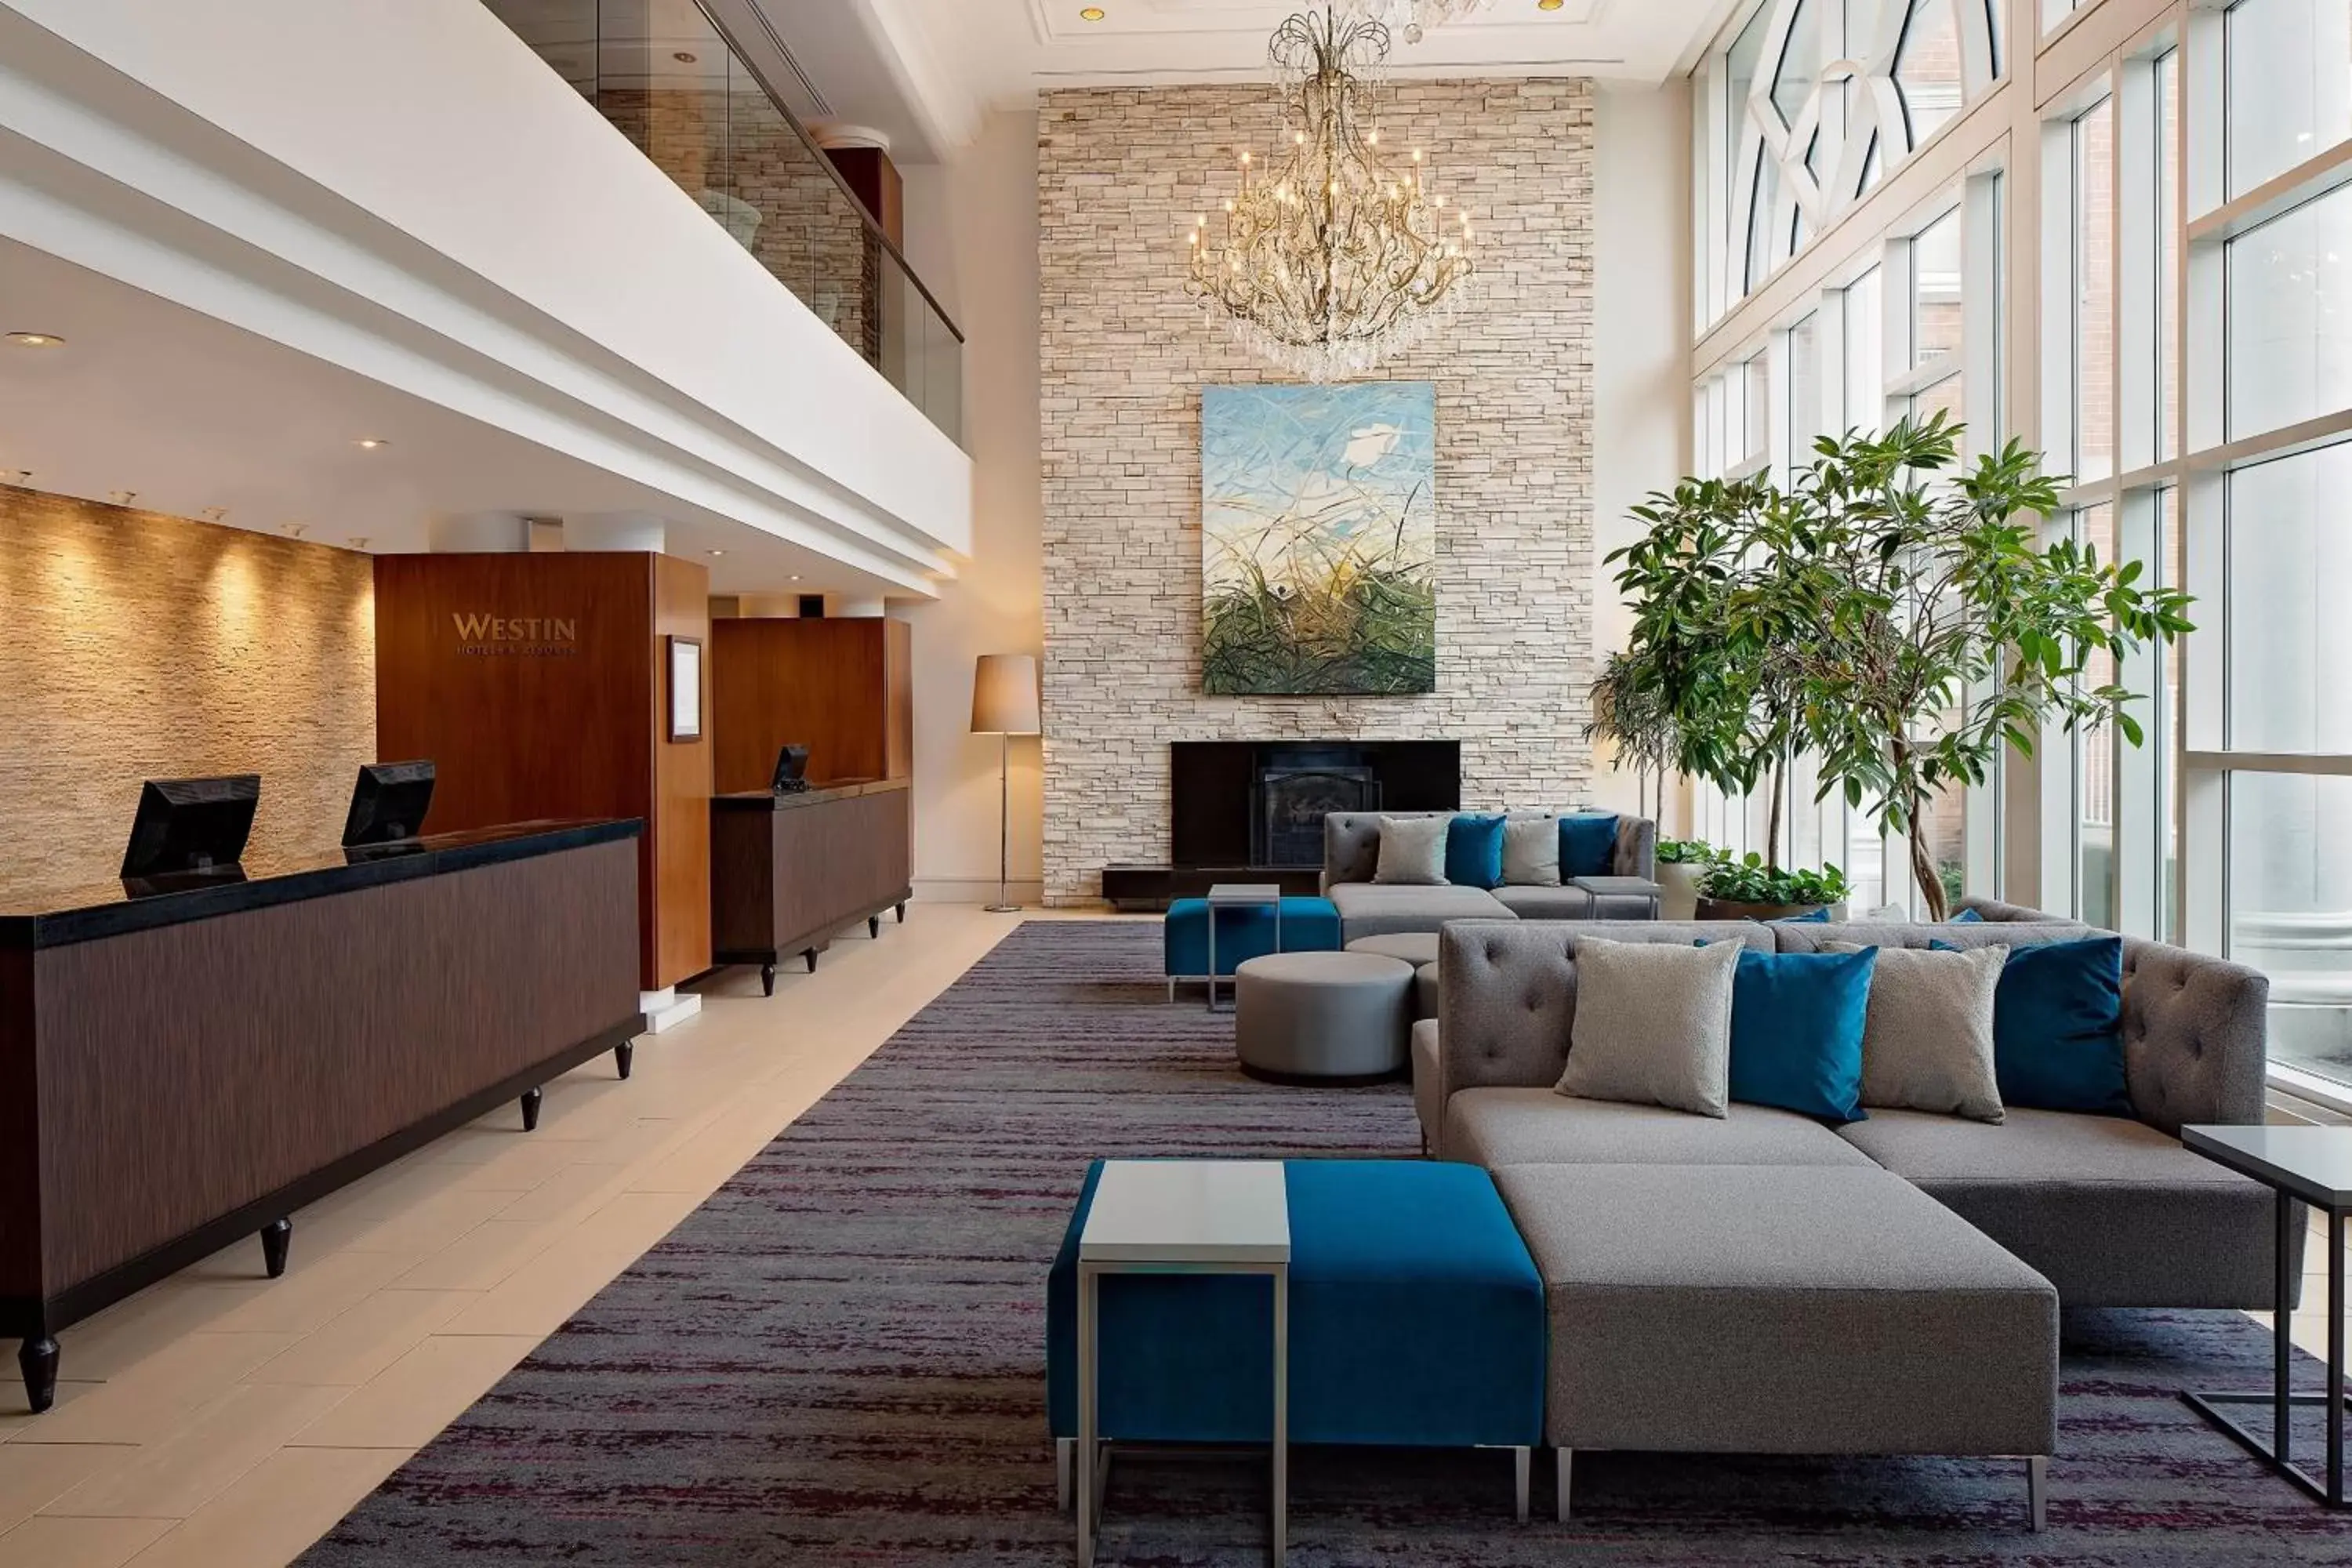 Lobby or reception in The Westin Governor Morris, Morristown